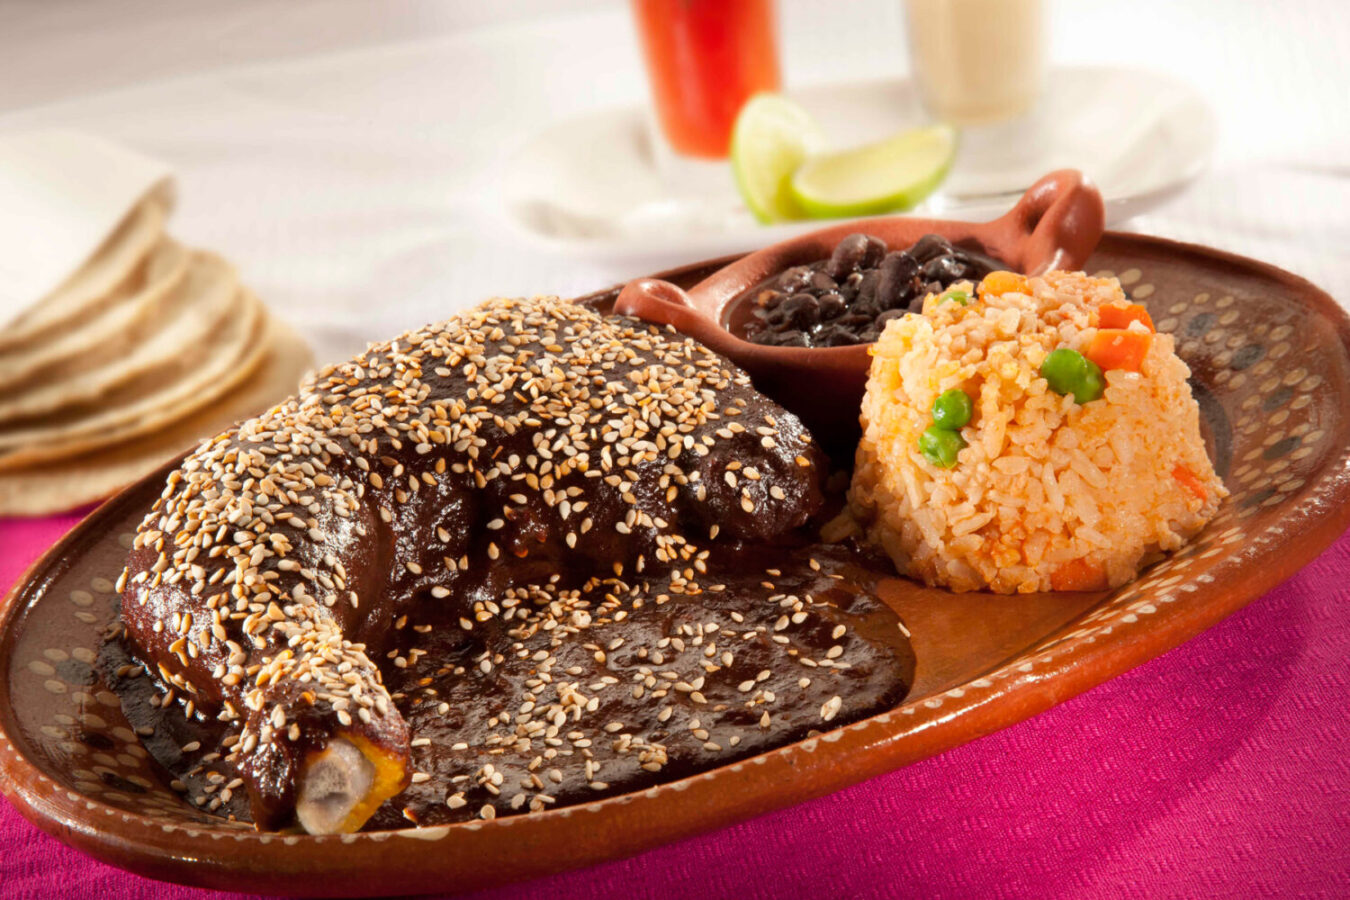 Mexico With 'M' of Mole